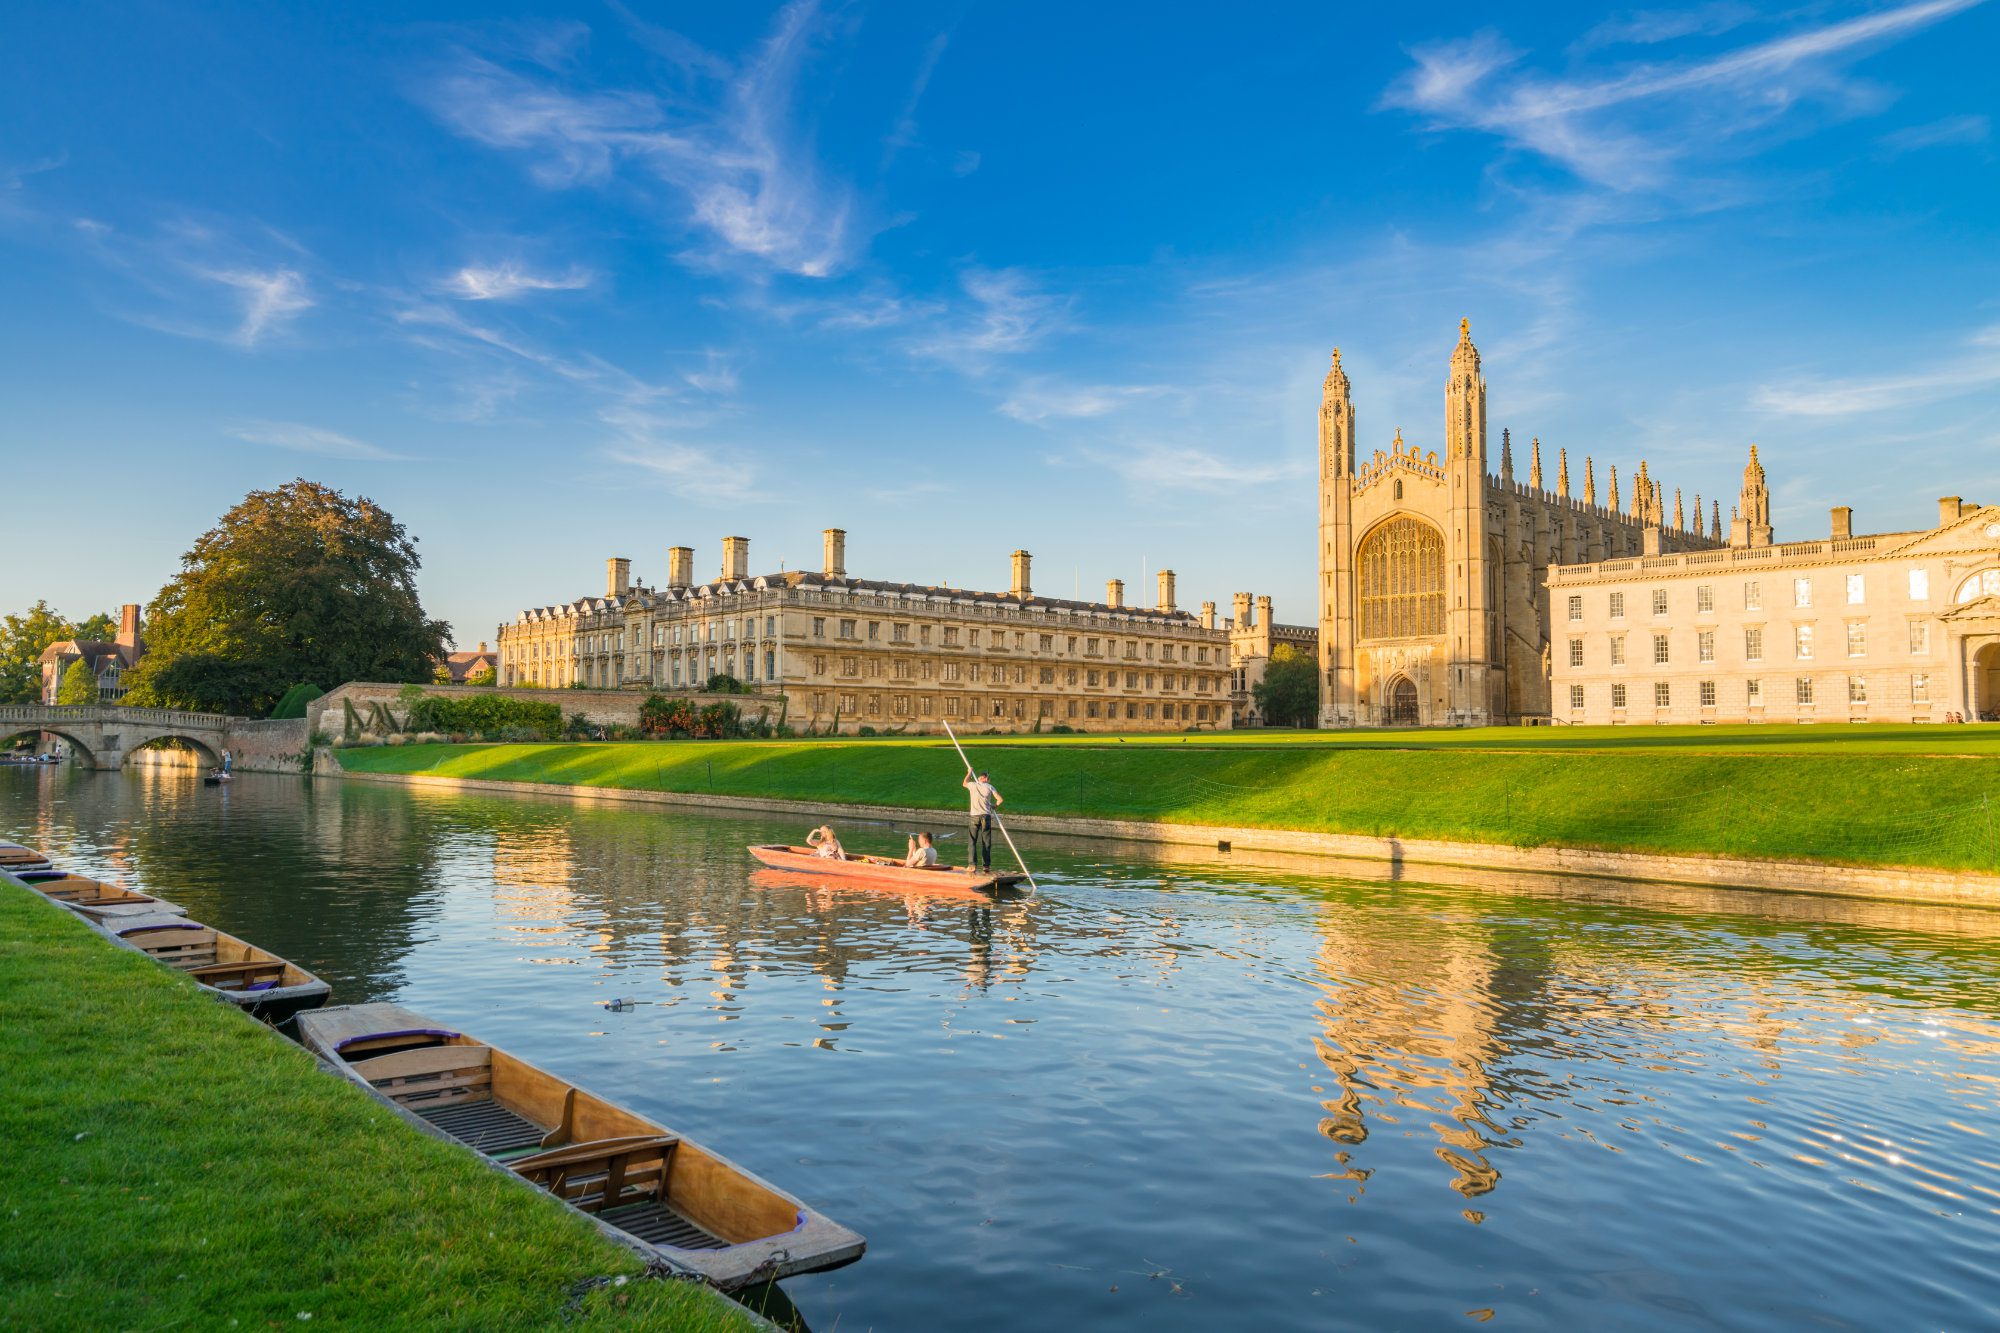 Beautiful view of college in Cambridge with people punting on river